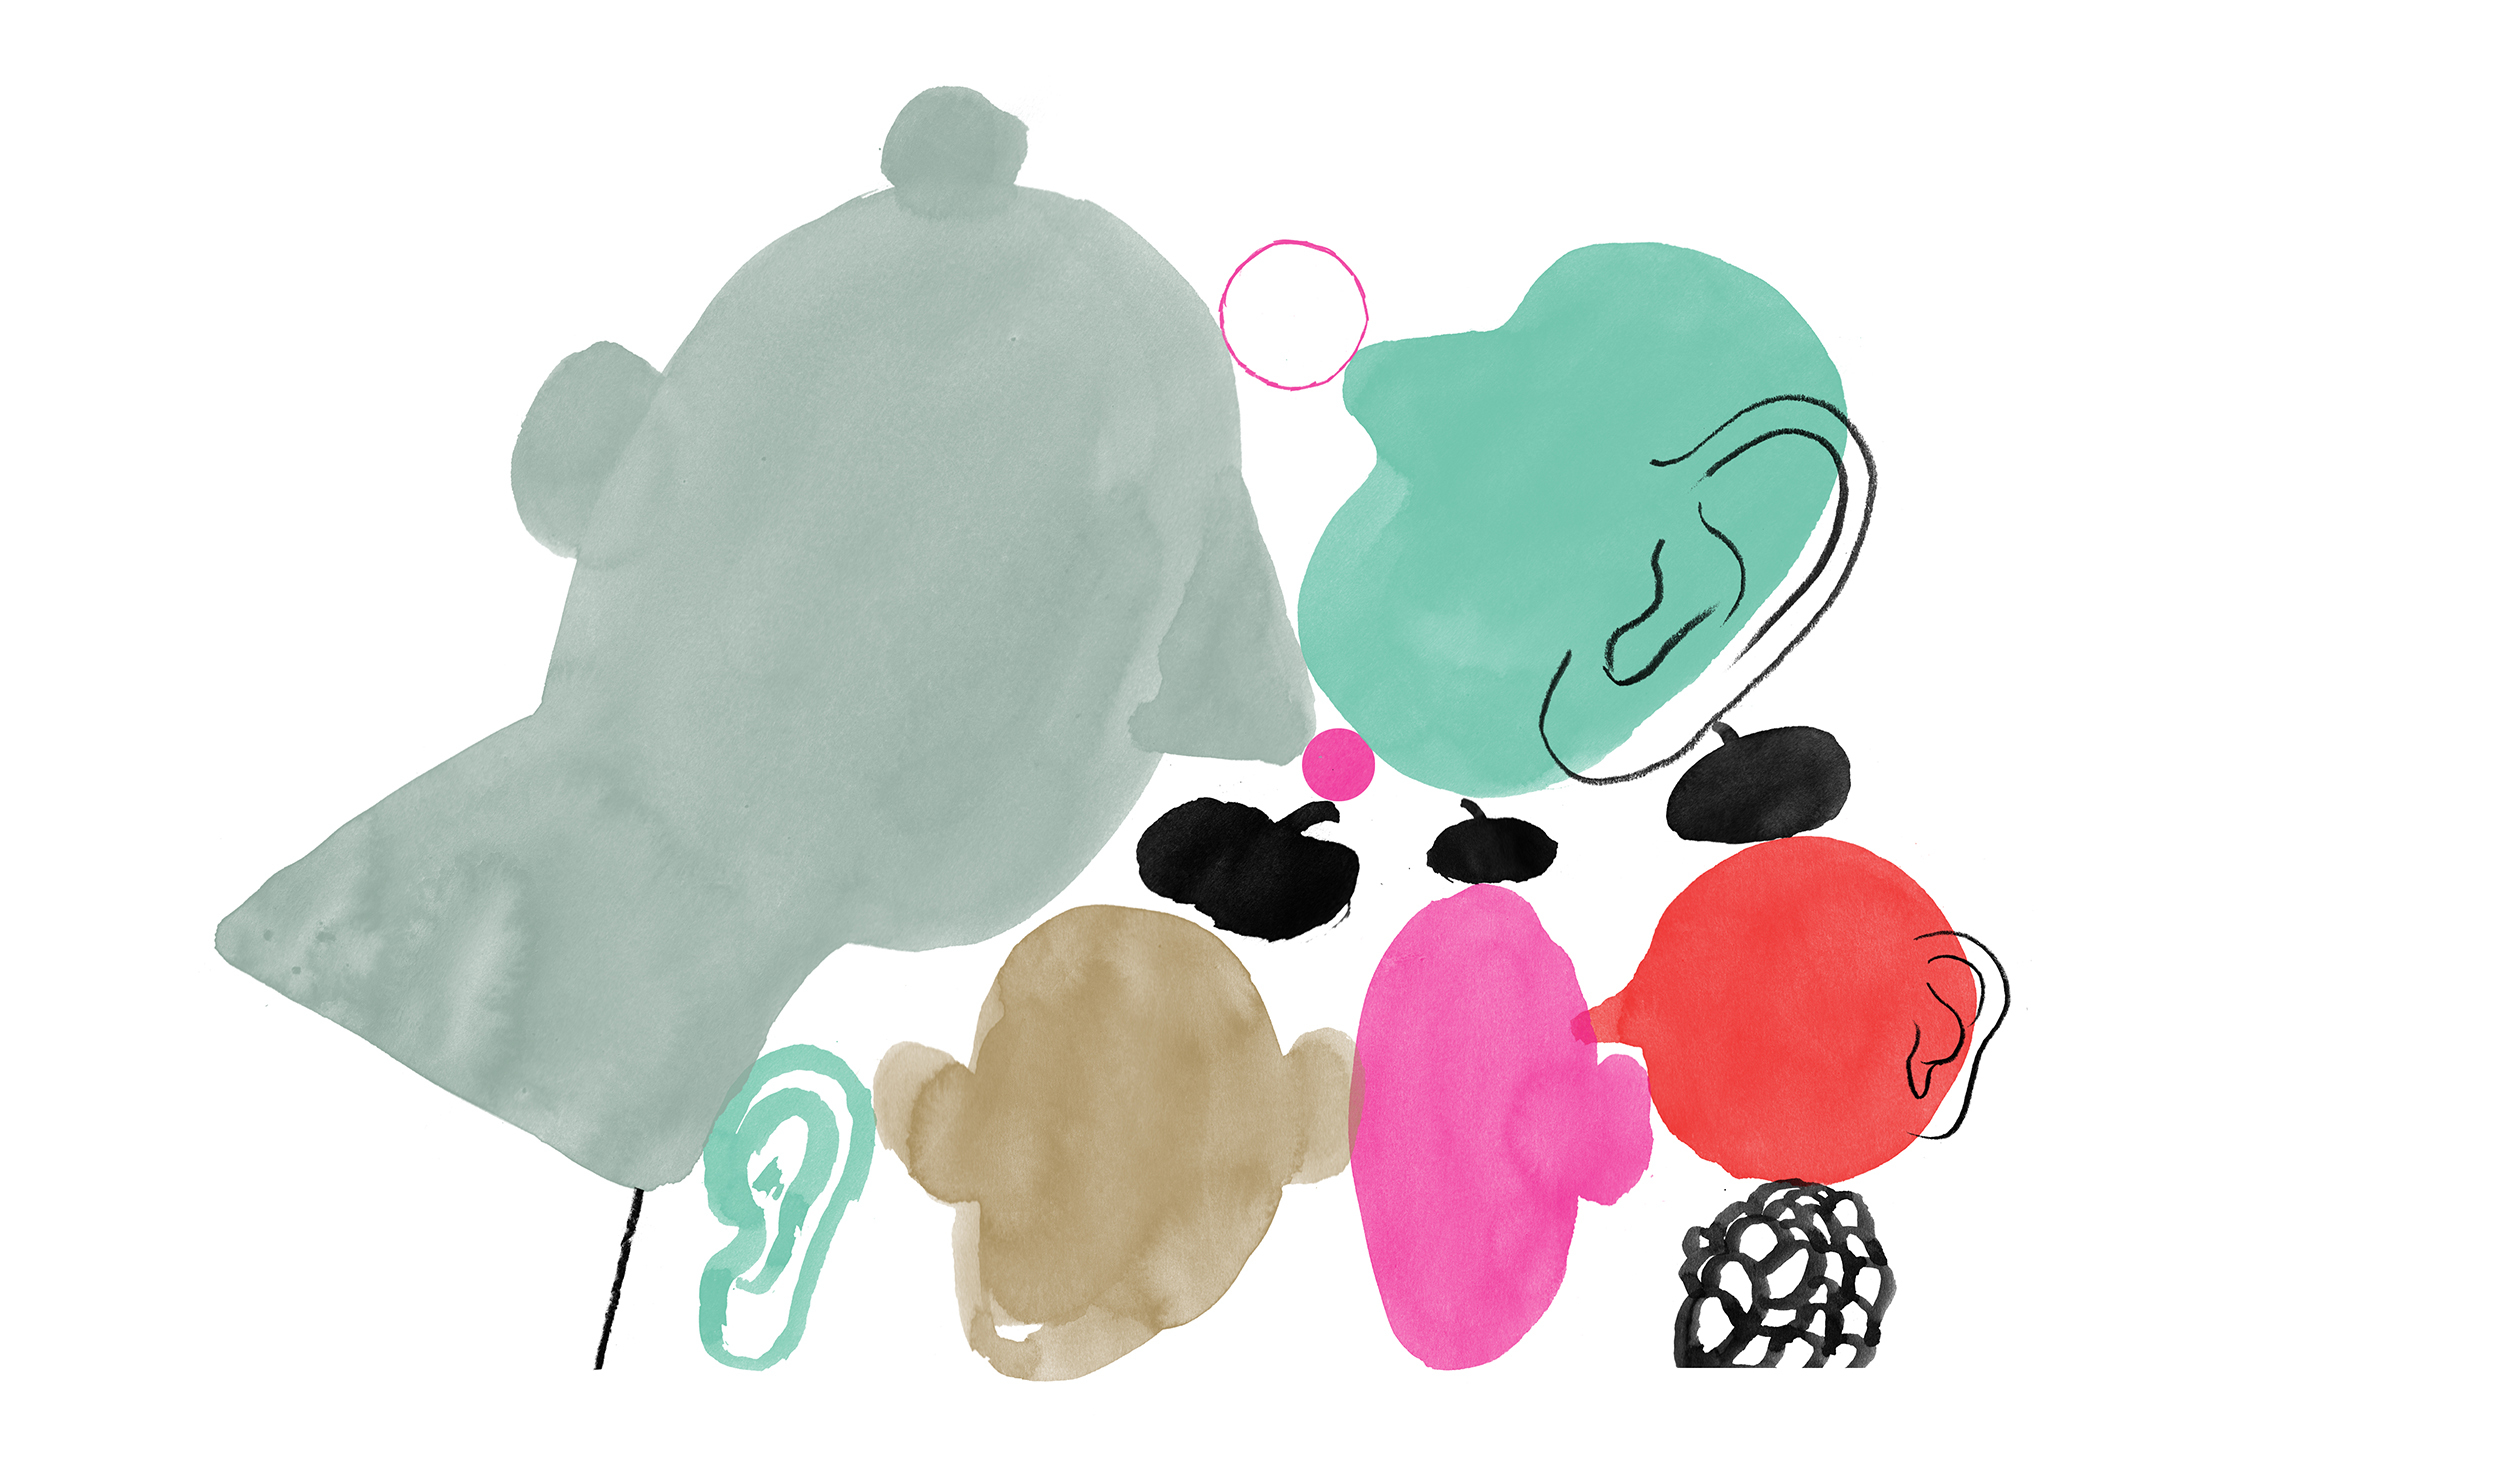 Illustration of abstract head shapes in grey, turquiose, pink, red and beige. There's also a figure of an ear. Some of the heads have small hats on. They are facing each other.